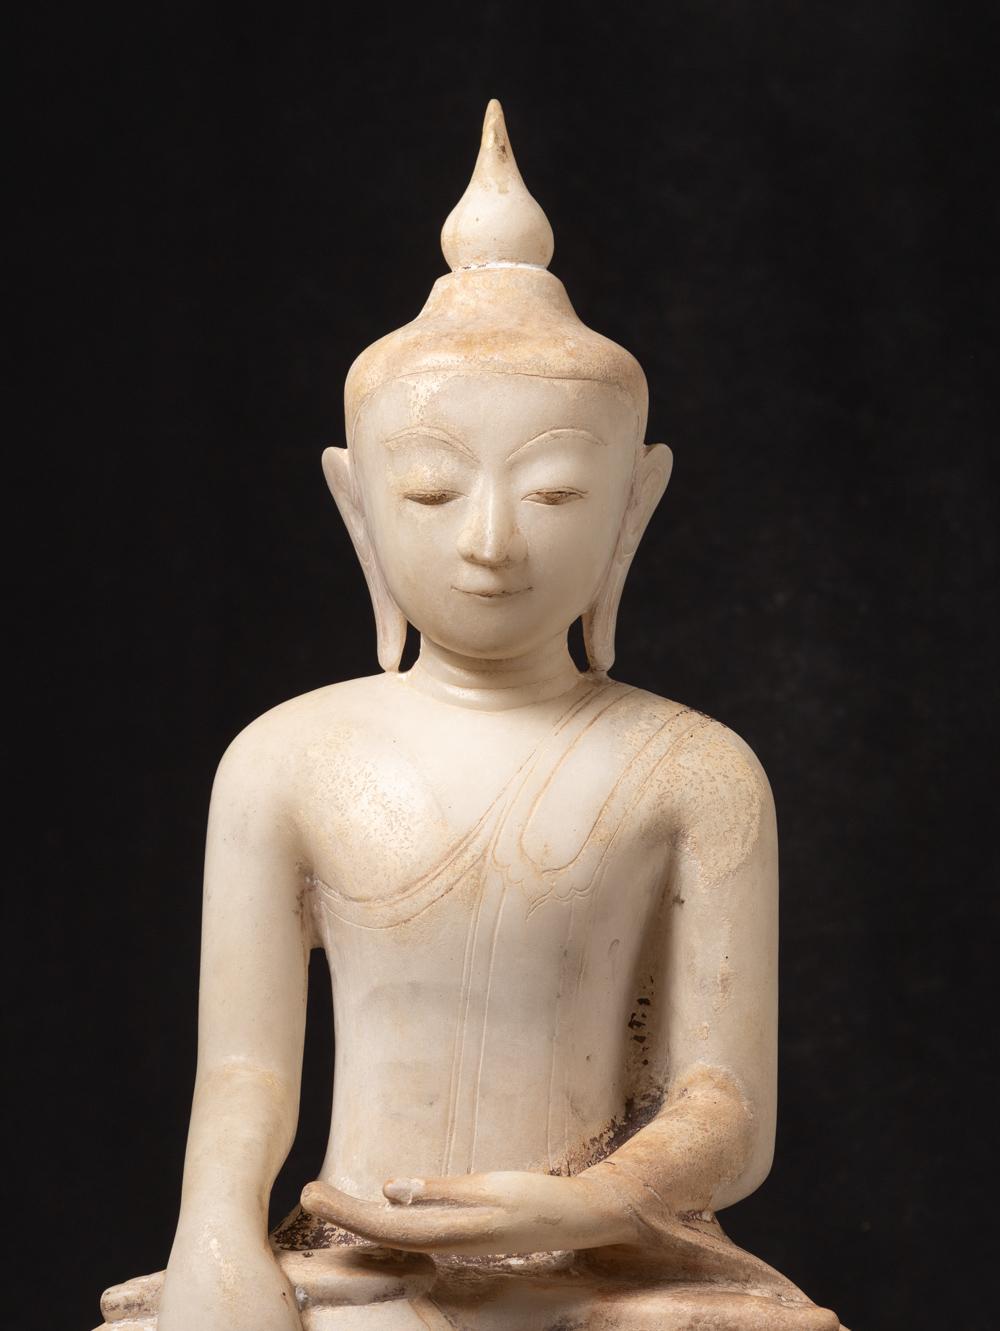 This antique marble Burmese Buddha statue is a magnificent With traces of the original lacquer and 24 krt. gilding. Crafted from marble, it stands at an impressive height of 73 cm and has dimensions of 43 cm in width and 24.5 cm in depth. 

The